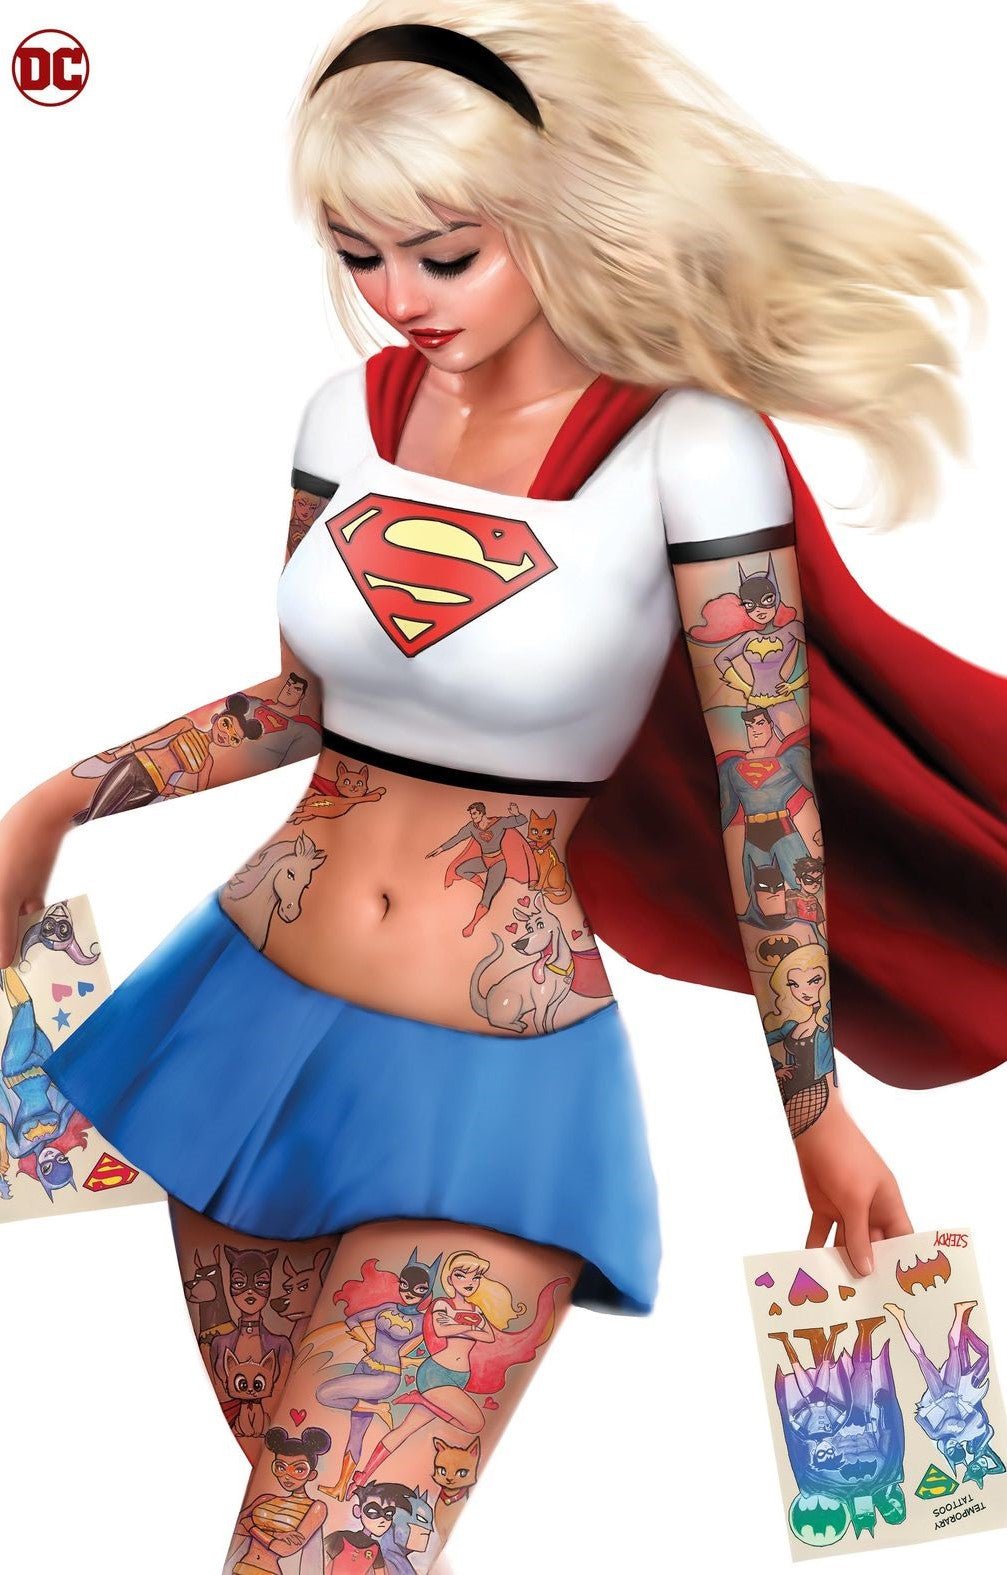 ACTION COMICS PRESENTS DOOMSDAY SPECIAL #1 (ONE SHOT) NATHAN SZERDY (616) EXCLUSIVE TATTOO VIRGIN VAR (09/13/2023) - FURYCOMIX